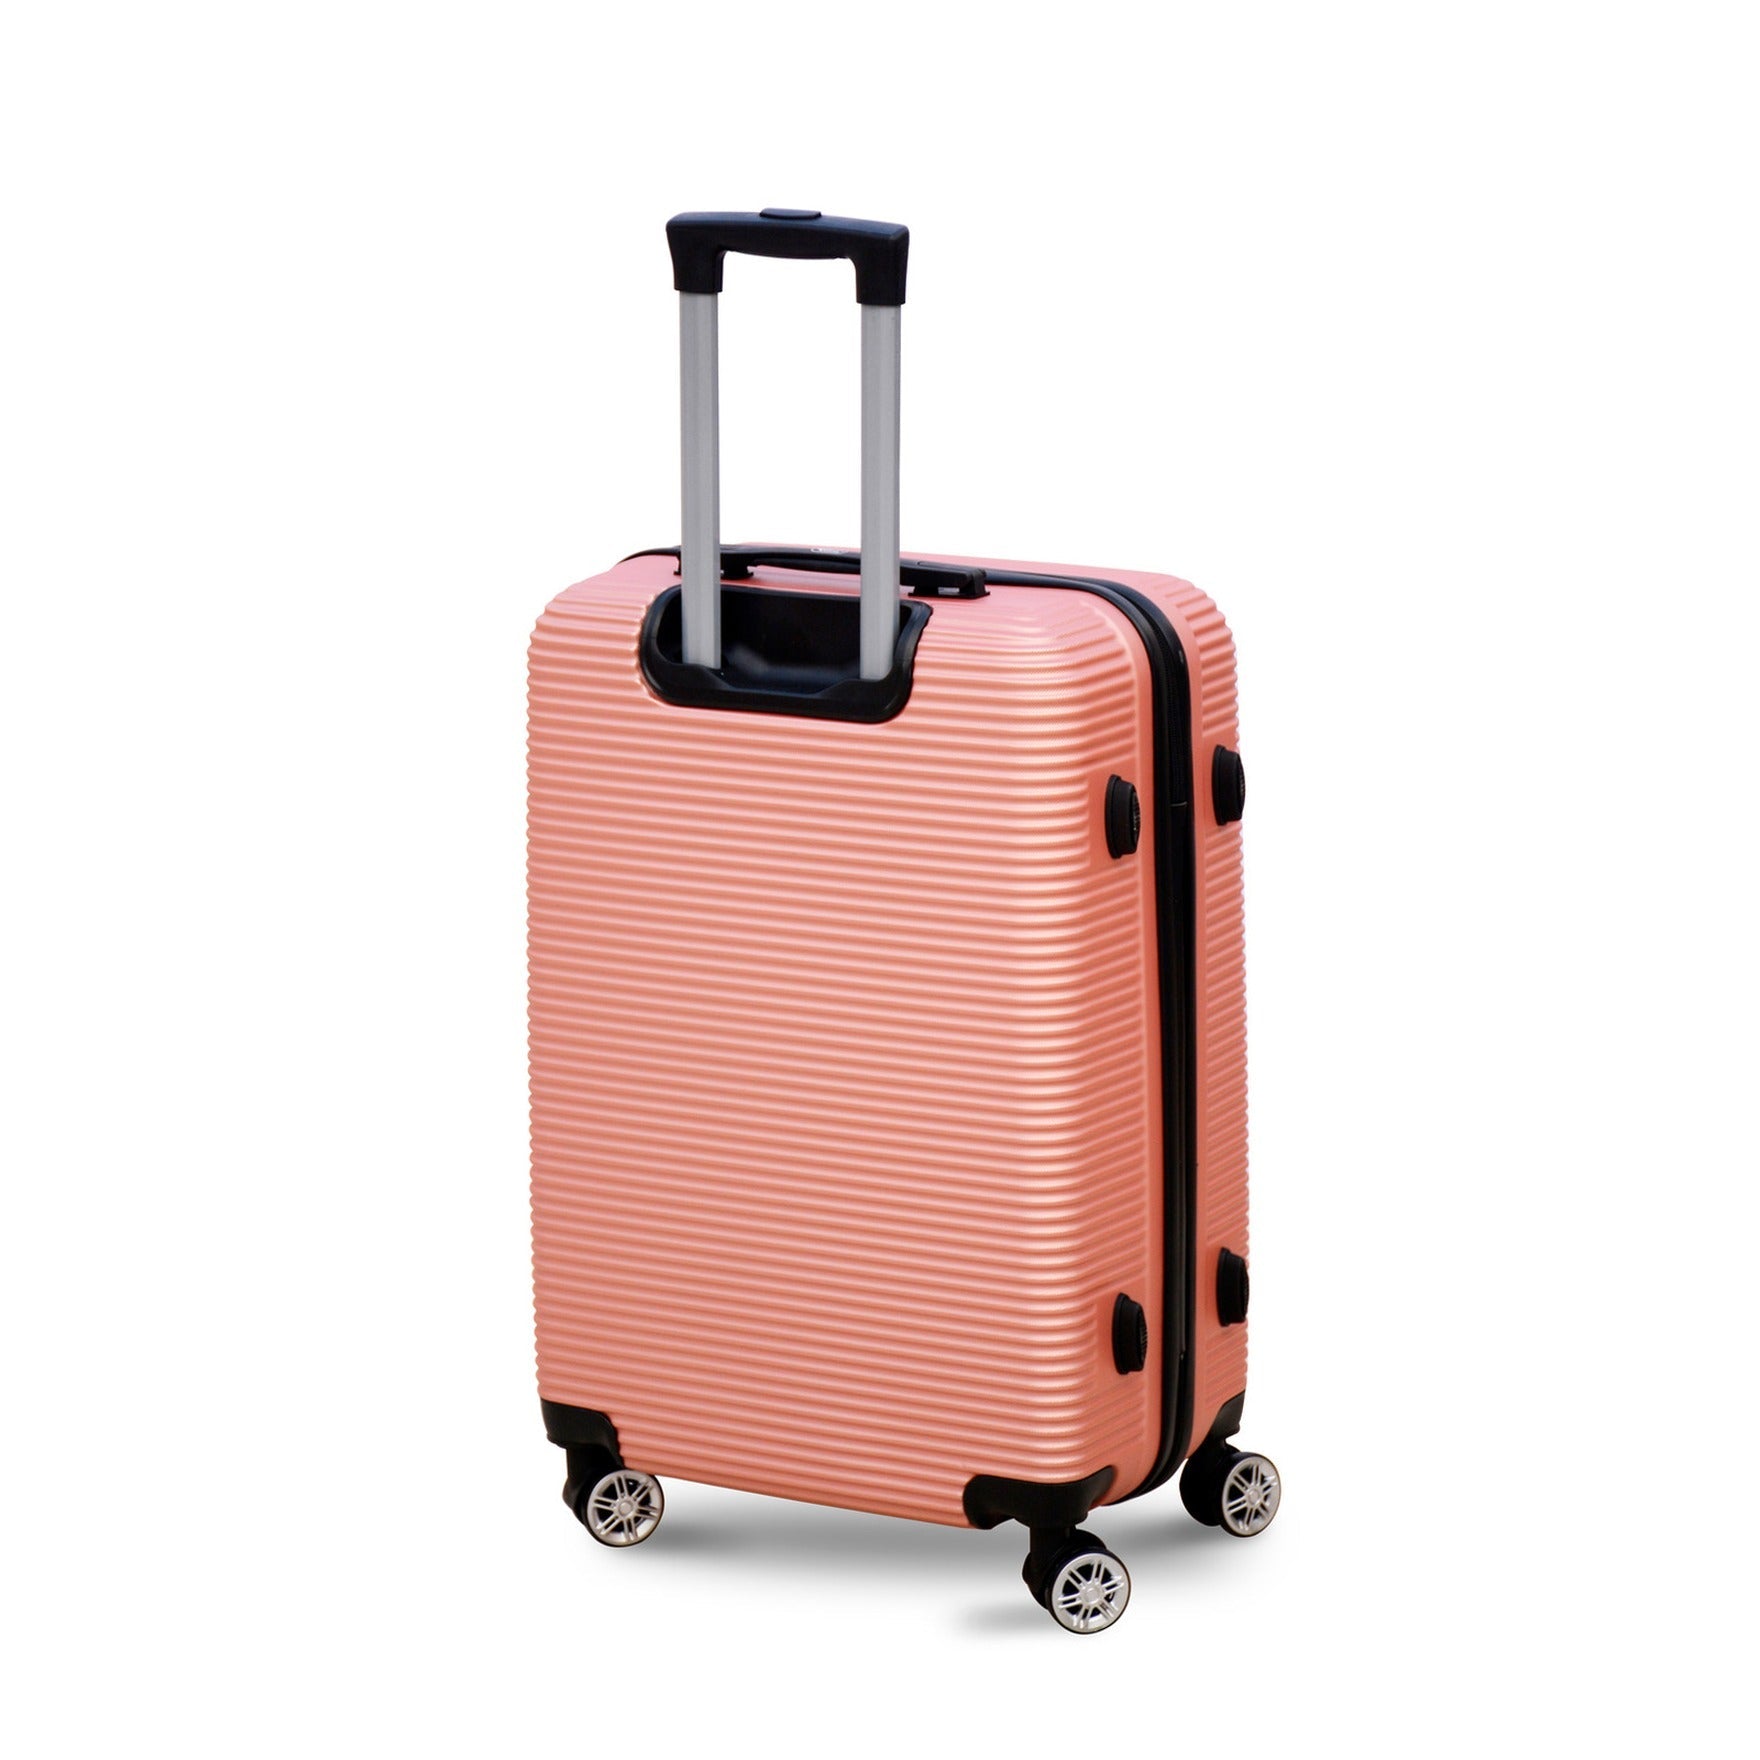 20" Dark Pink Colour JIAN ABS Line Luggage Lightweight Hard Case Carry On Trolley Bag With Spinner Wheel